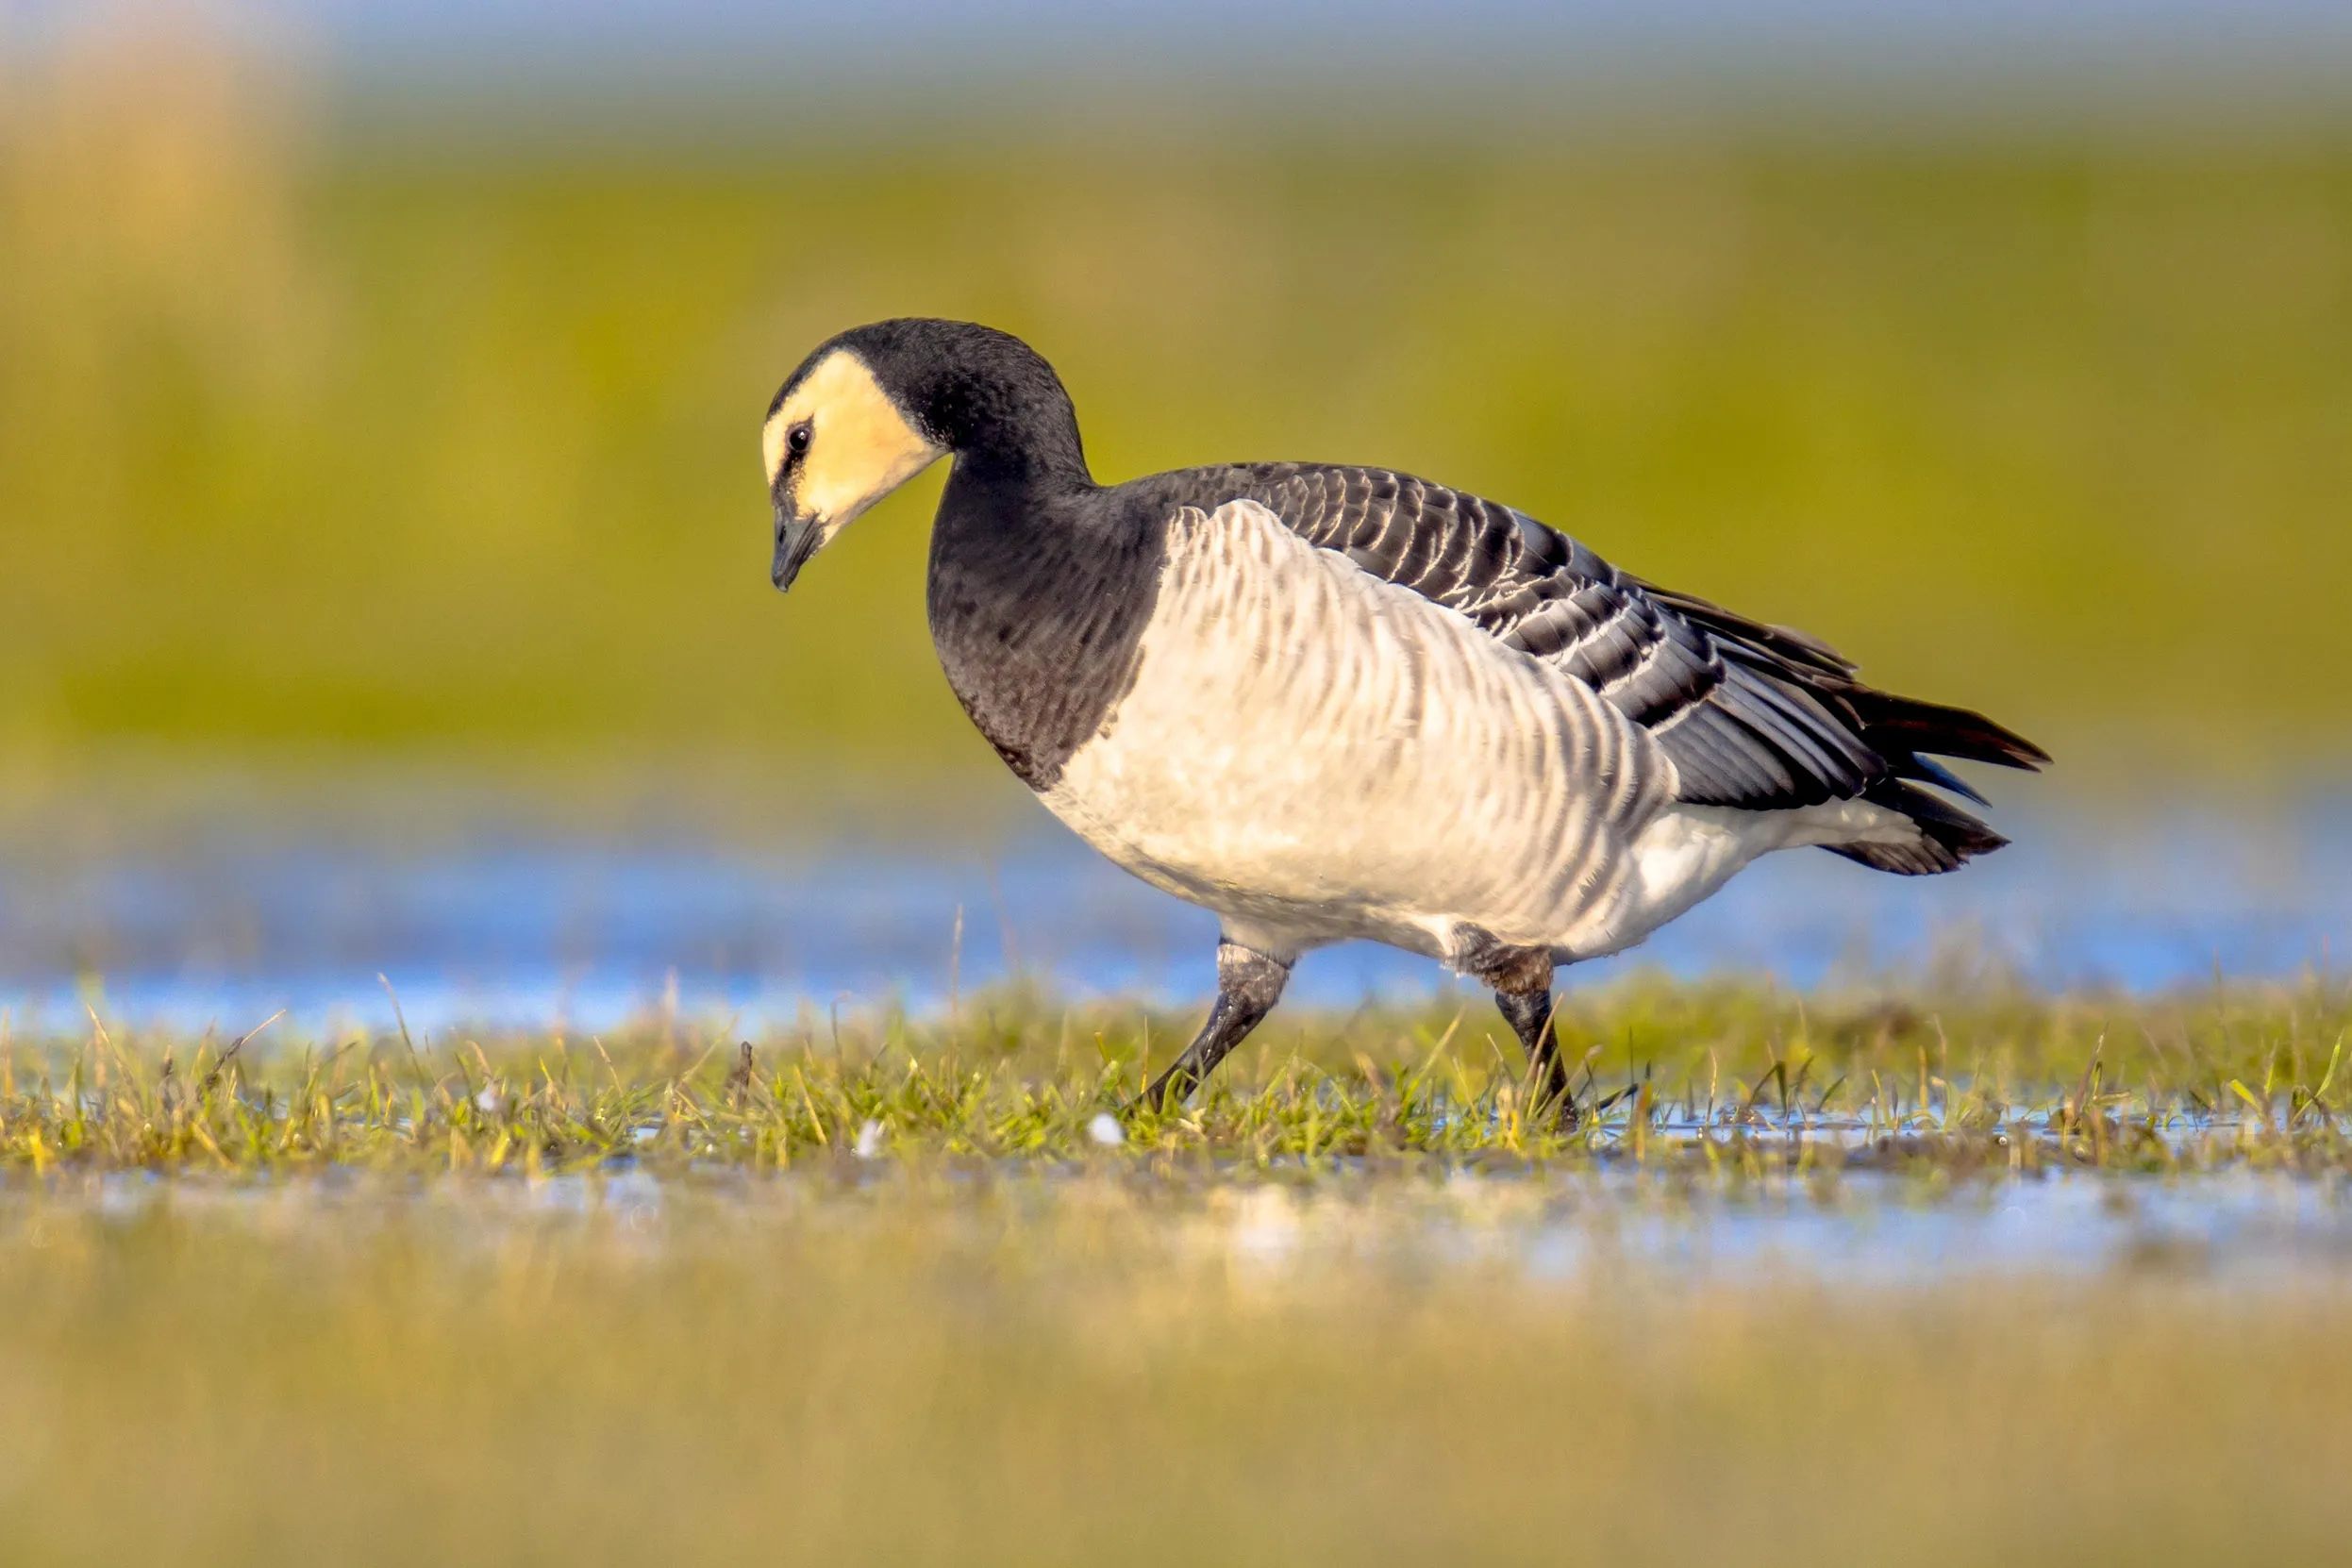 A lone Barnacle Goose walking in shallow waters.